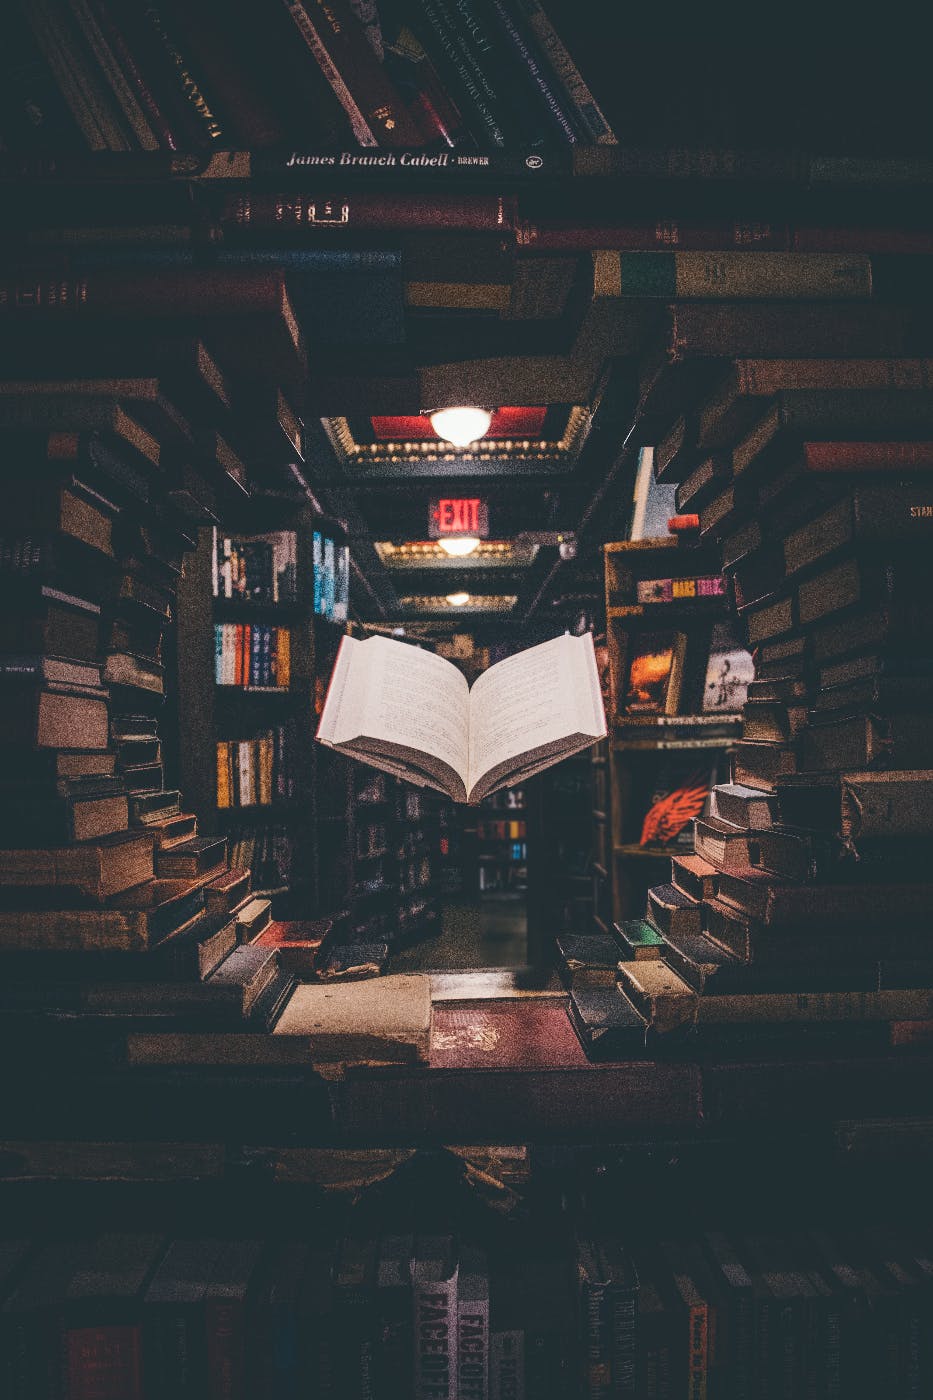 An open book floating among stacked books